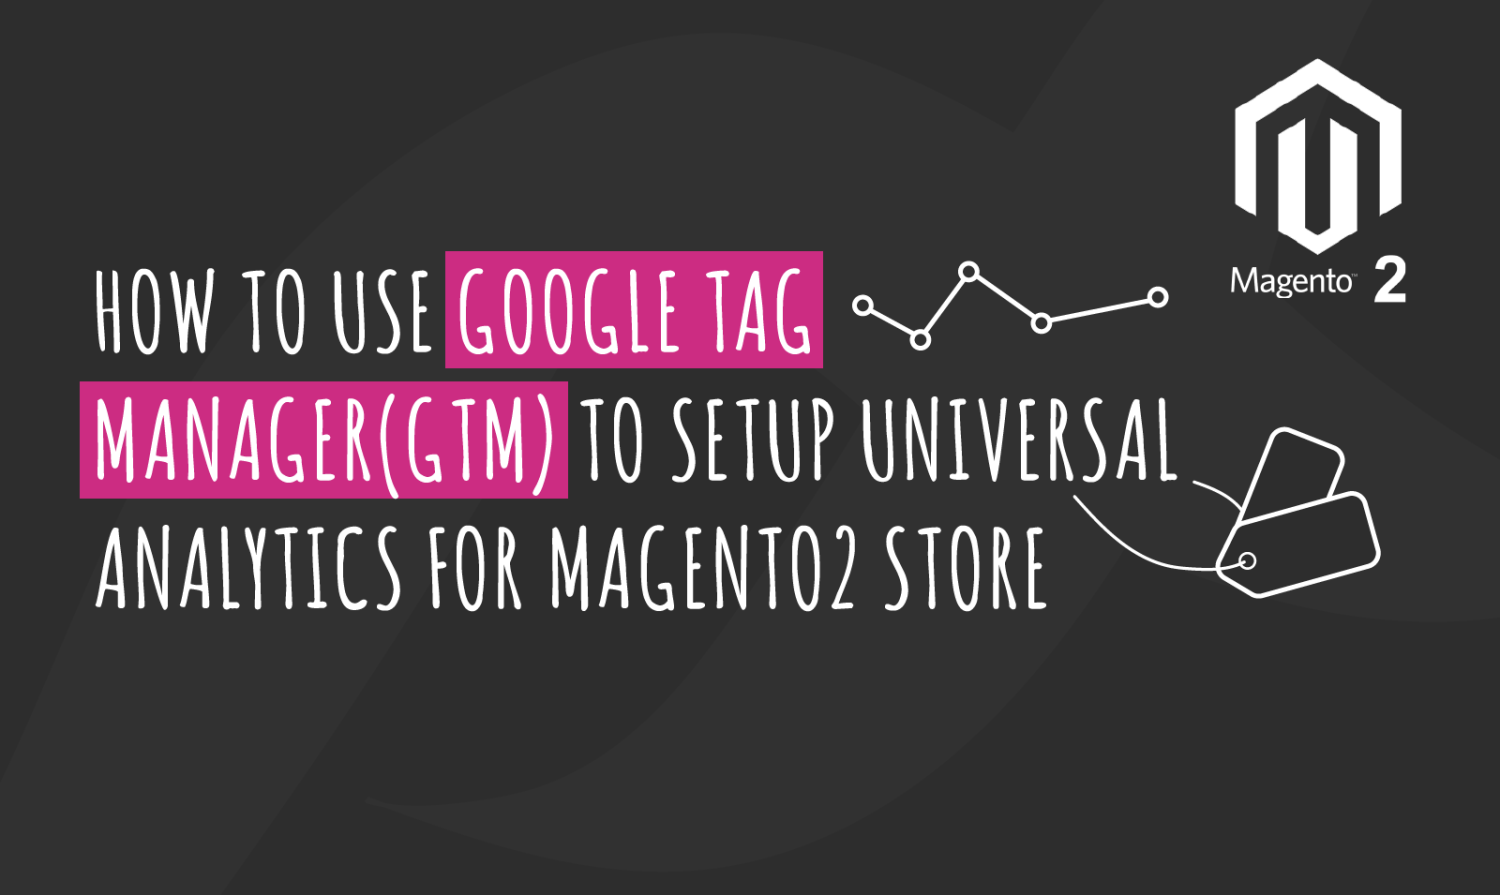 How to use Google Tag Manager(GTM) to Setup Universal Analytics for Magento2 Store?